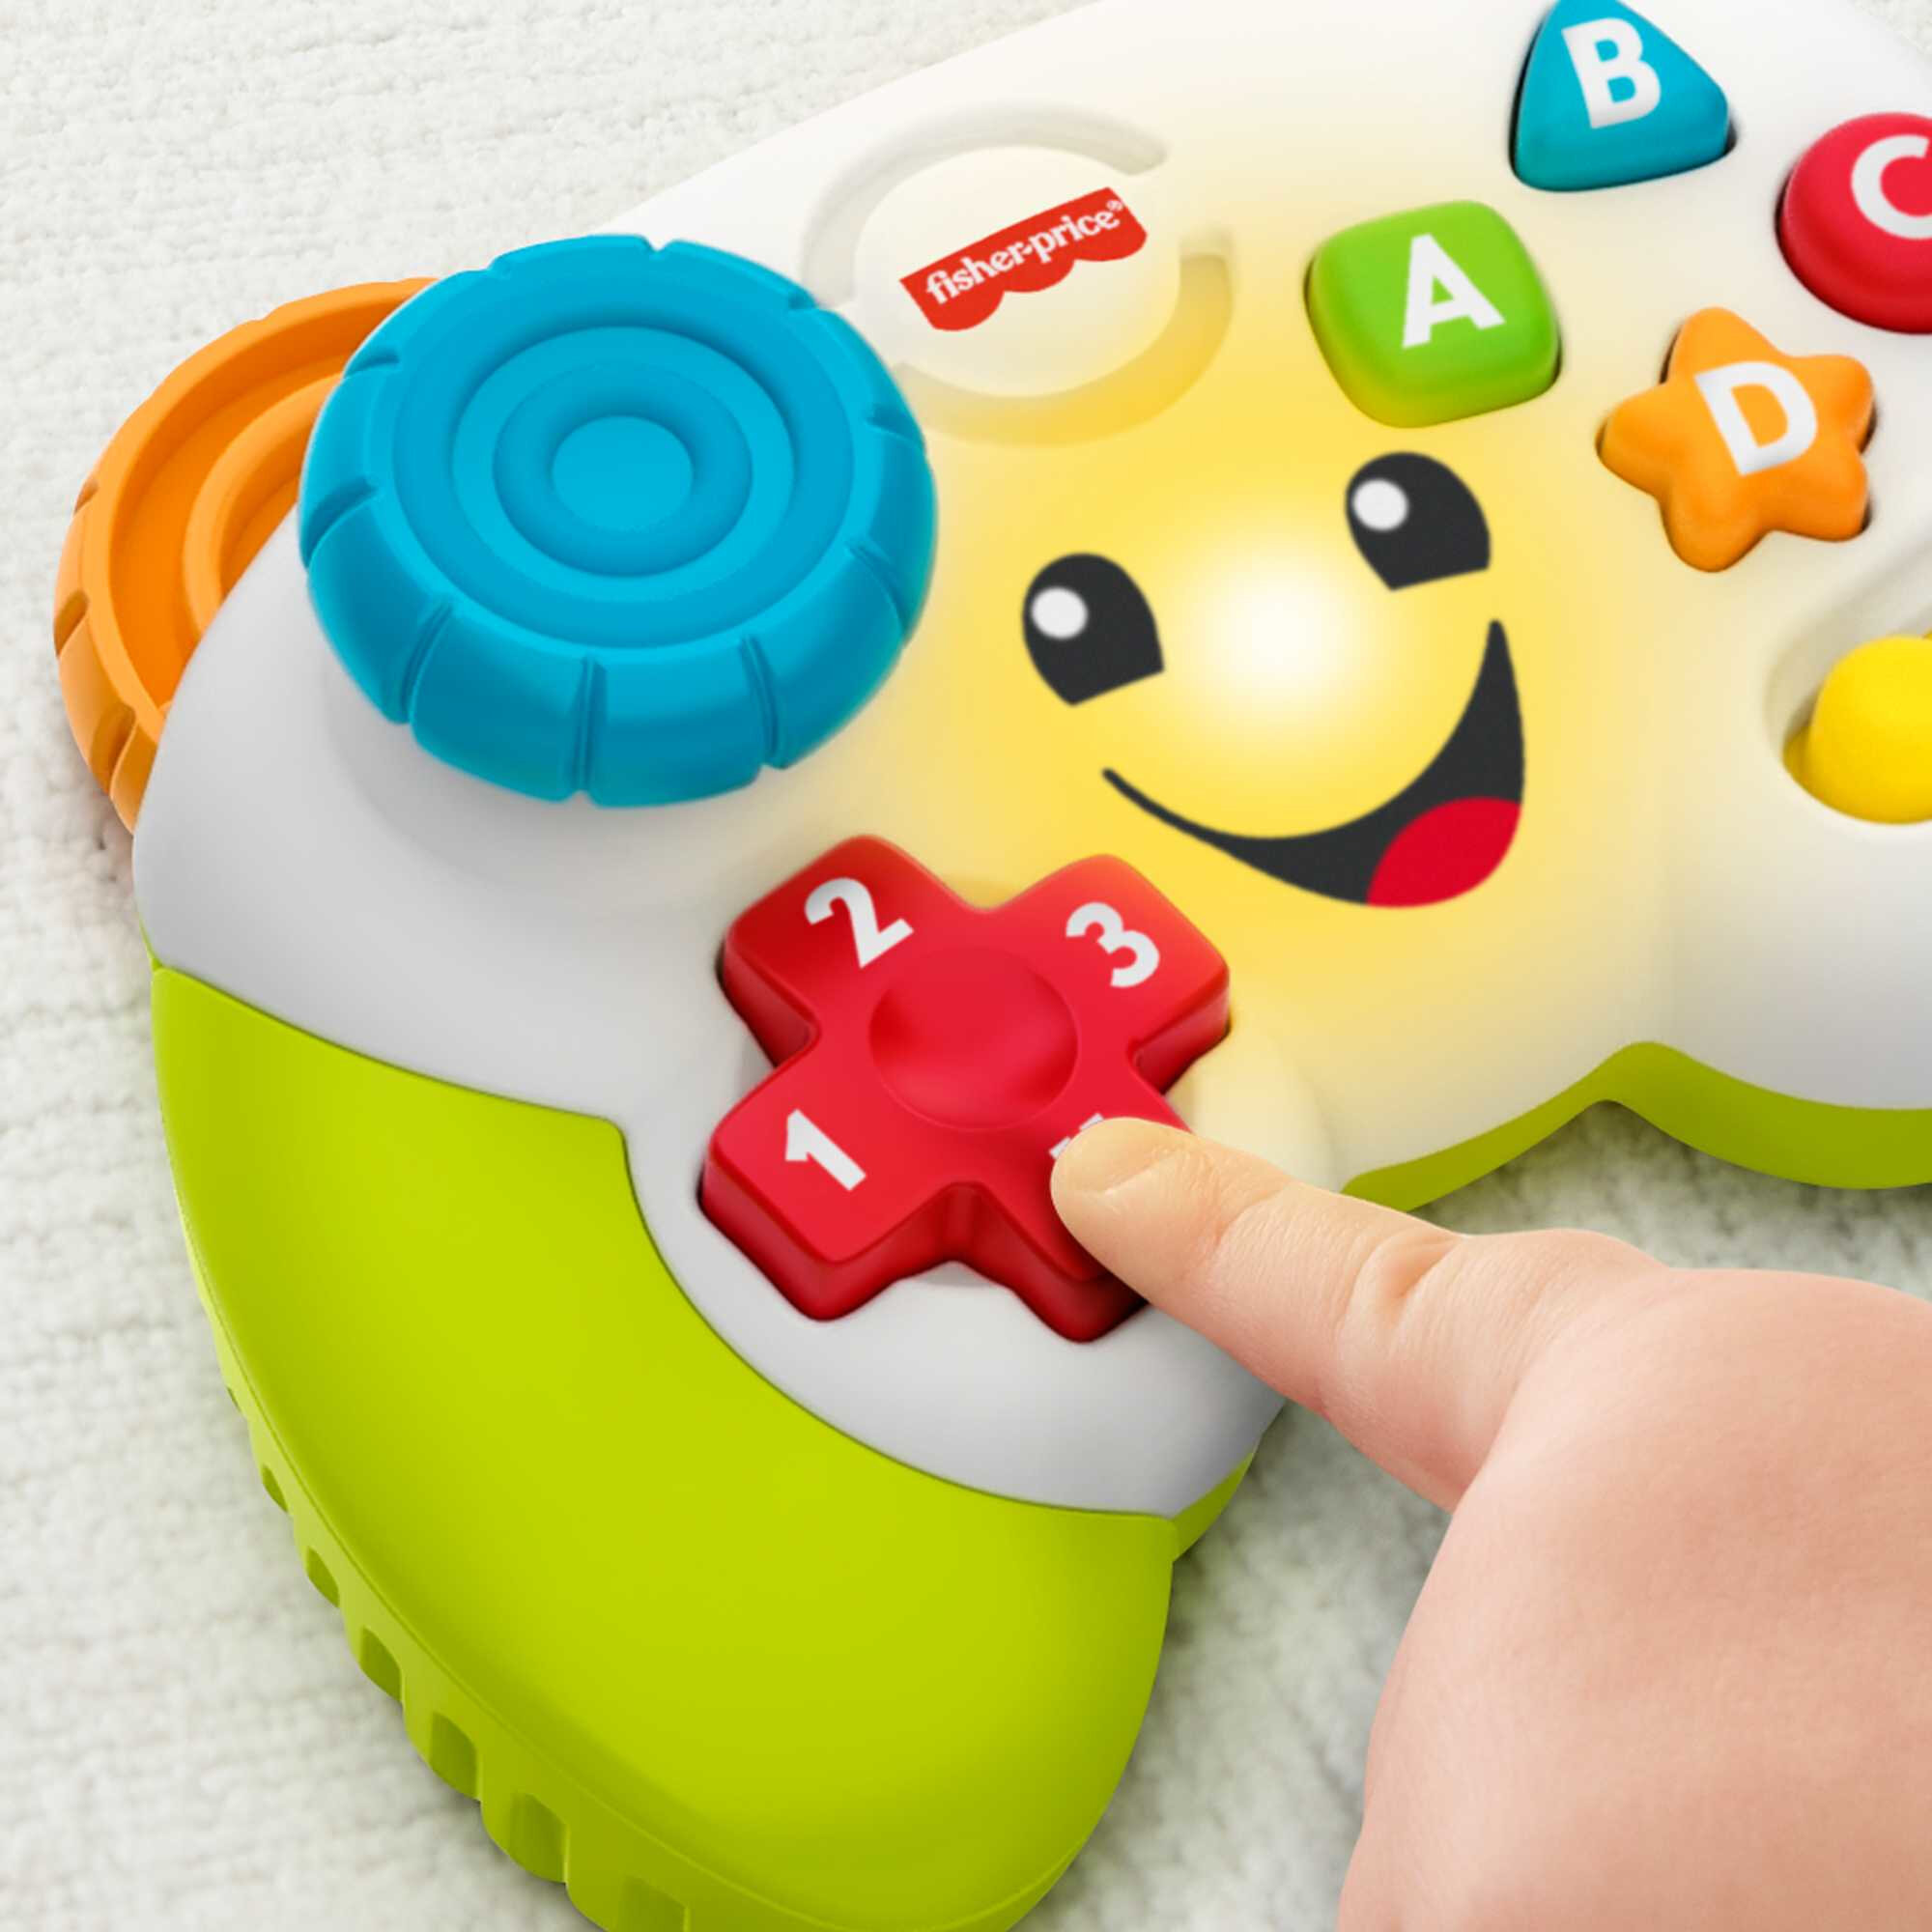 Fisher-Price Laugh & Learn Game & Learn Controller, Ages 6 to 36 Months - image 5 of 8